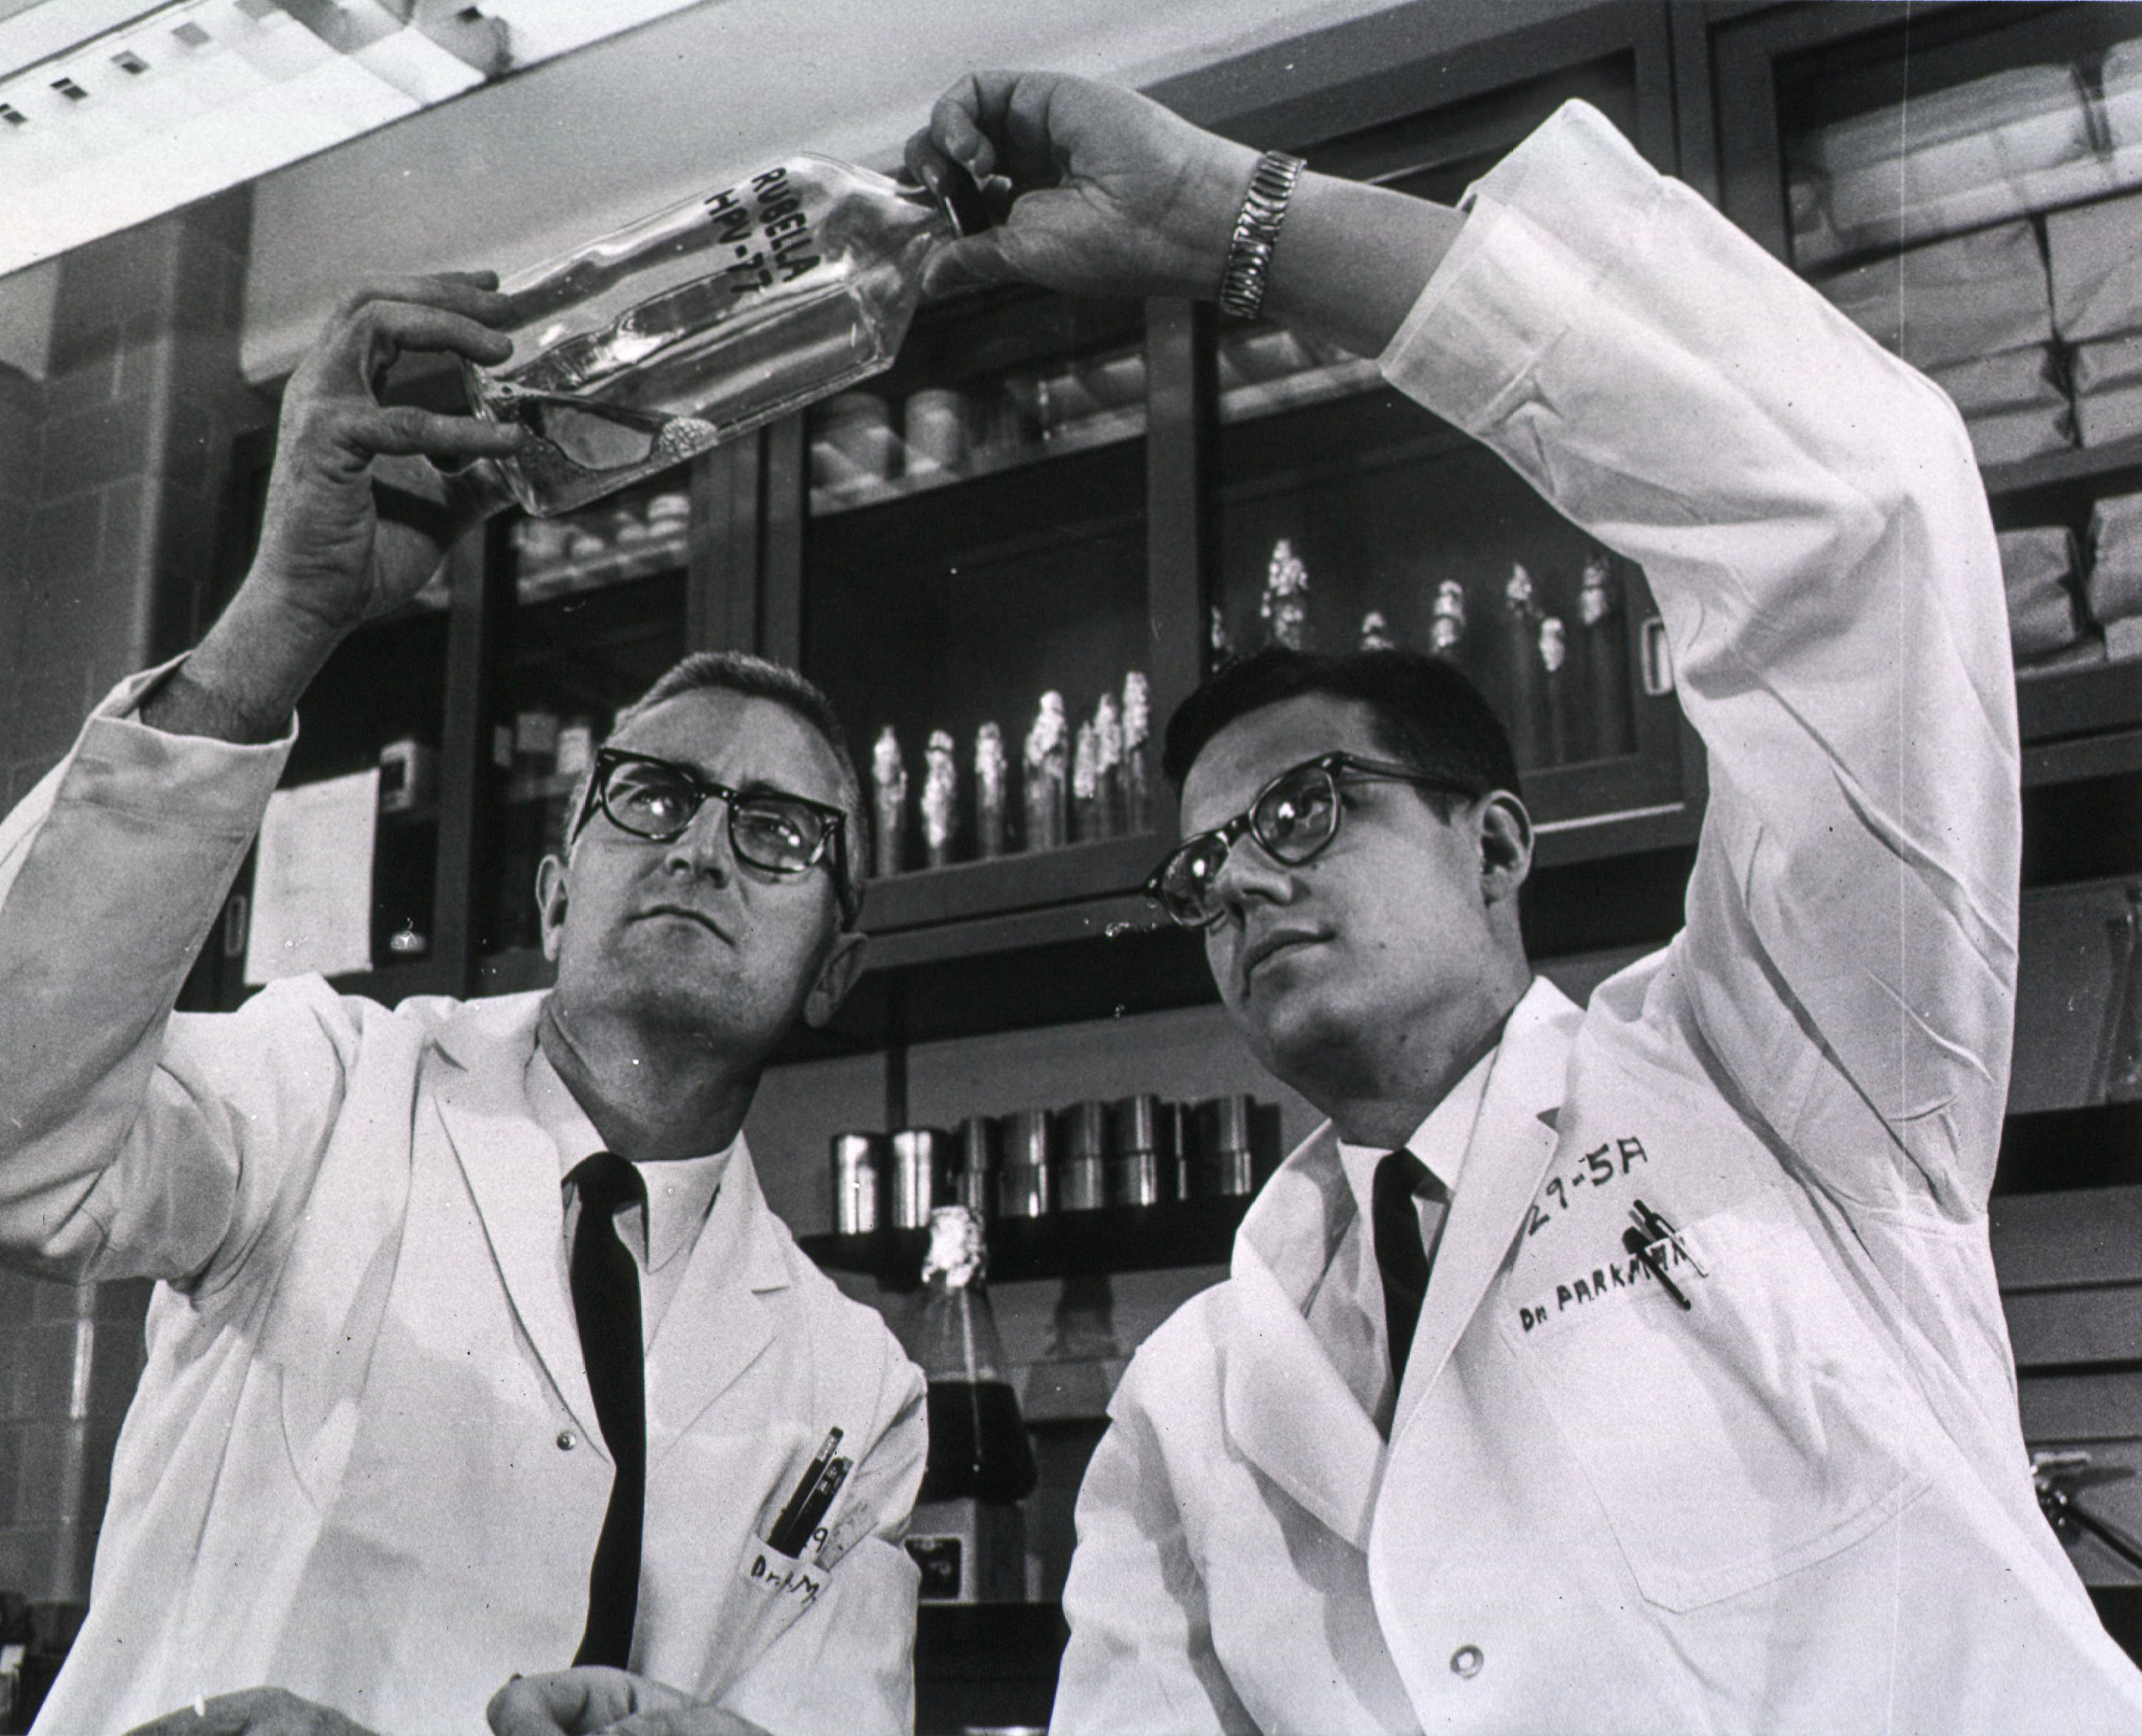 Two men in lab coats examine a bottle labelled Rubella